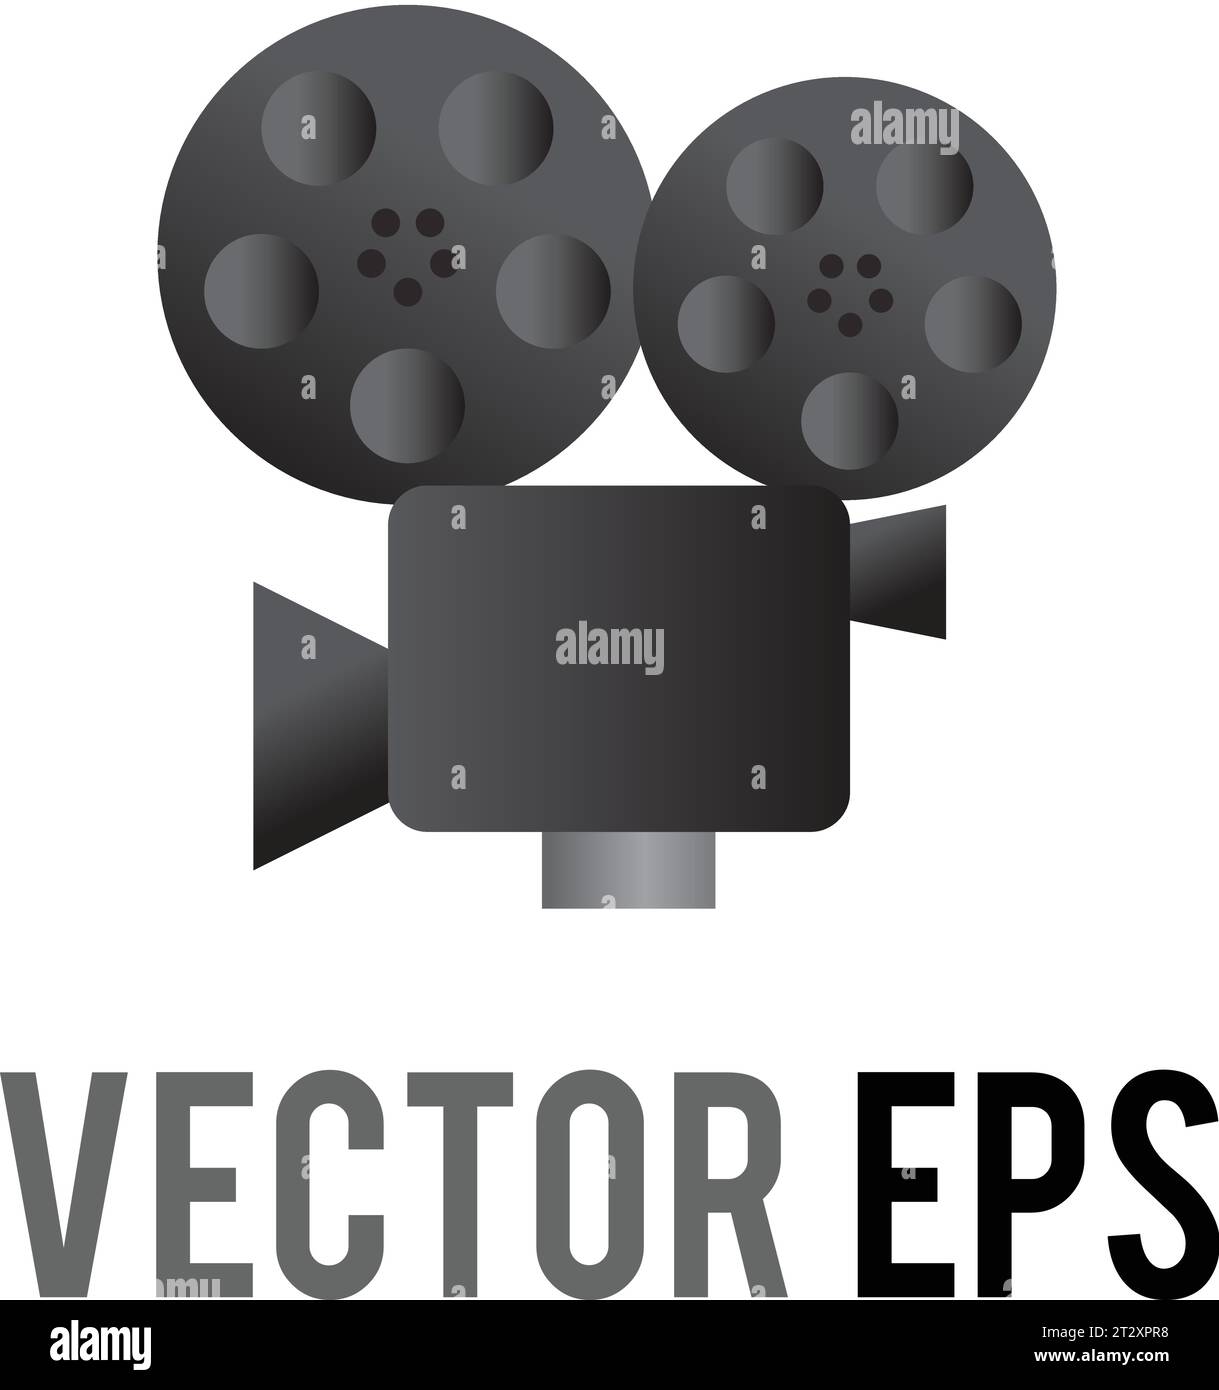 The isolated vector gray and black classic movie camera icon with two mounted reels of film, viewfinder, and lens, used for content concerning movies, Stock Vector